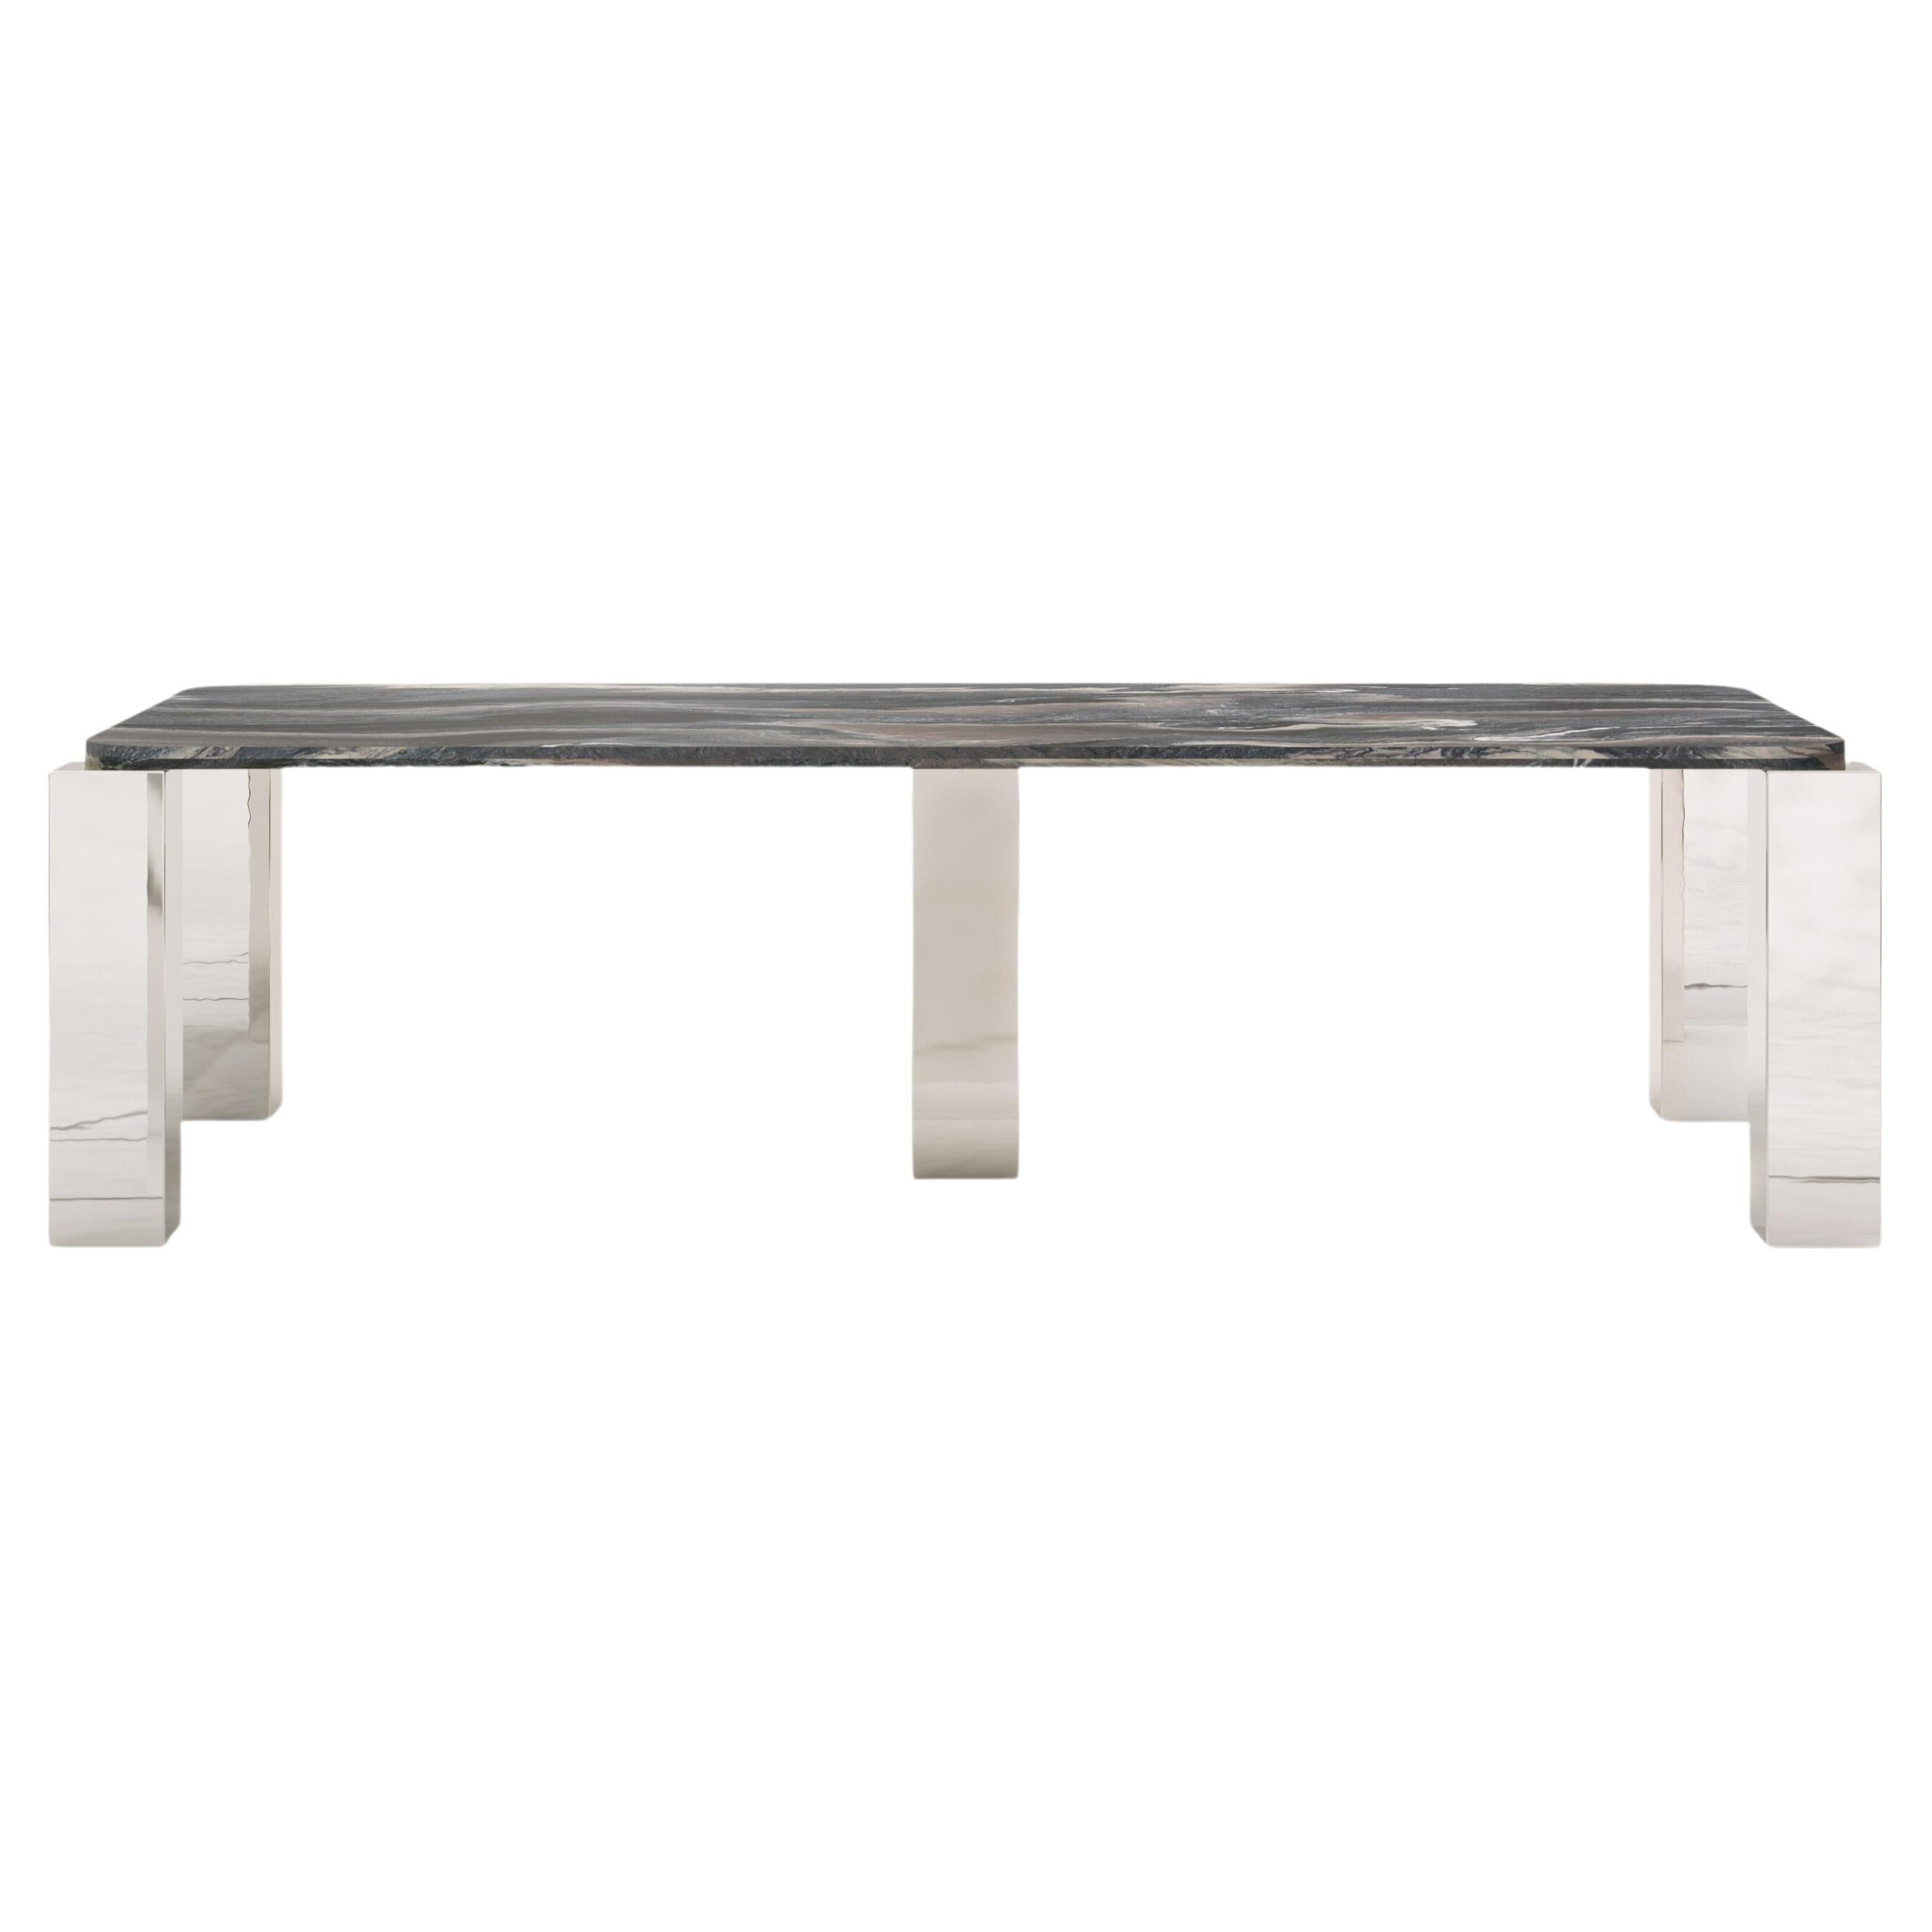 FORM(LA) Cubo Rectangle Dining Table 98”L x 44”W x 30”H Ondulato Marble & Chrome For Sale